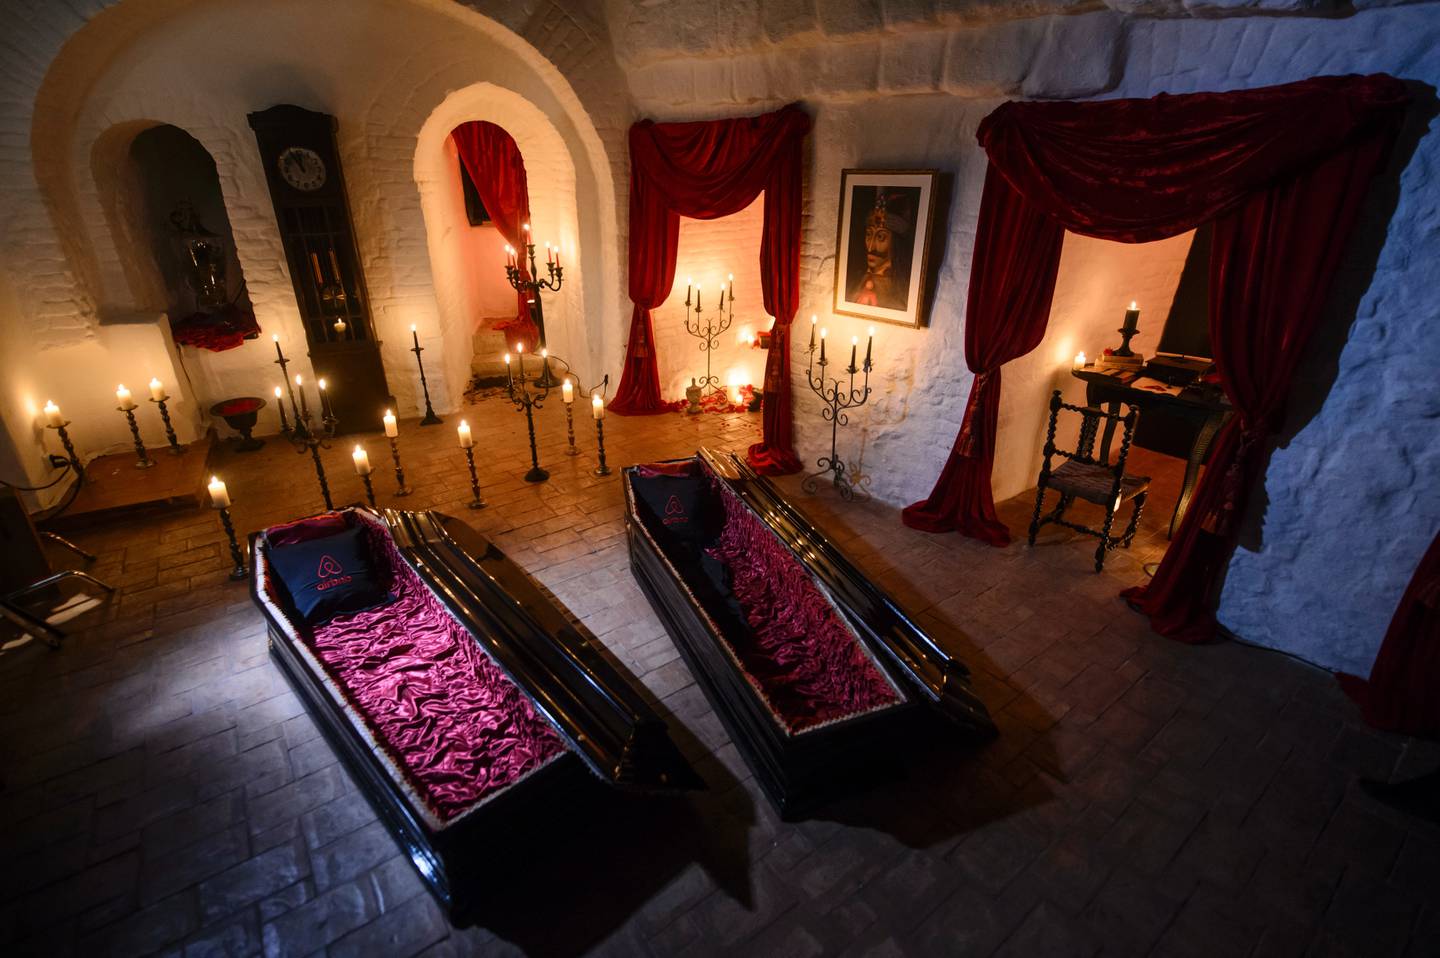 In this picture taken Oct. 9, 2016, two coffins are lit before a photo shoot in Bran Castle, in Bran, Romania. Airbnb has launched a contest to find two people to stay overnight in the castle on Halloween, popularly known as Dracula‚Äôs castle because of its connection to the cruel real-life prince Vlad the Impaler, who inspired the legend of Dracula. (AP Photo/Andreea Alexandru)